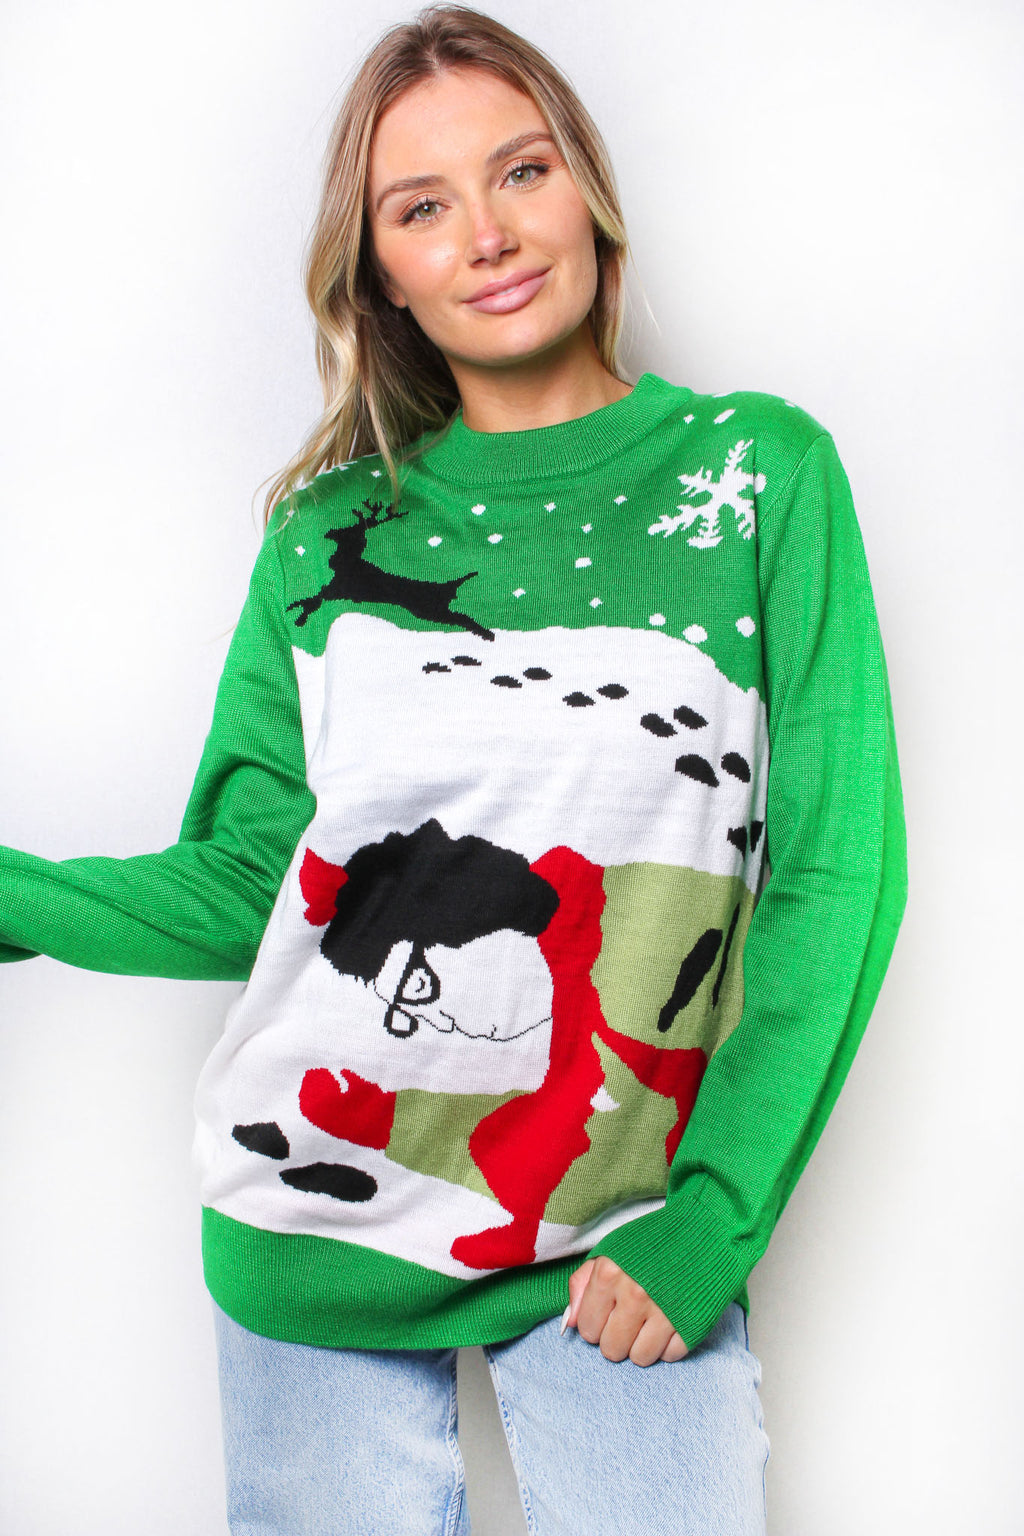 Women's Crew Neck Long Sleeves Knit Christmas Print Sweater